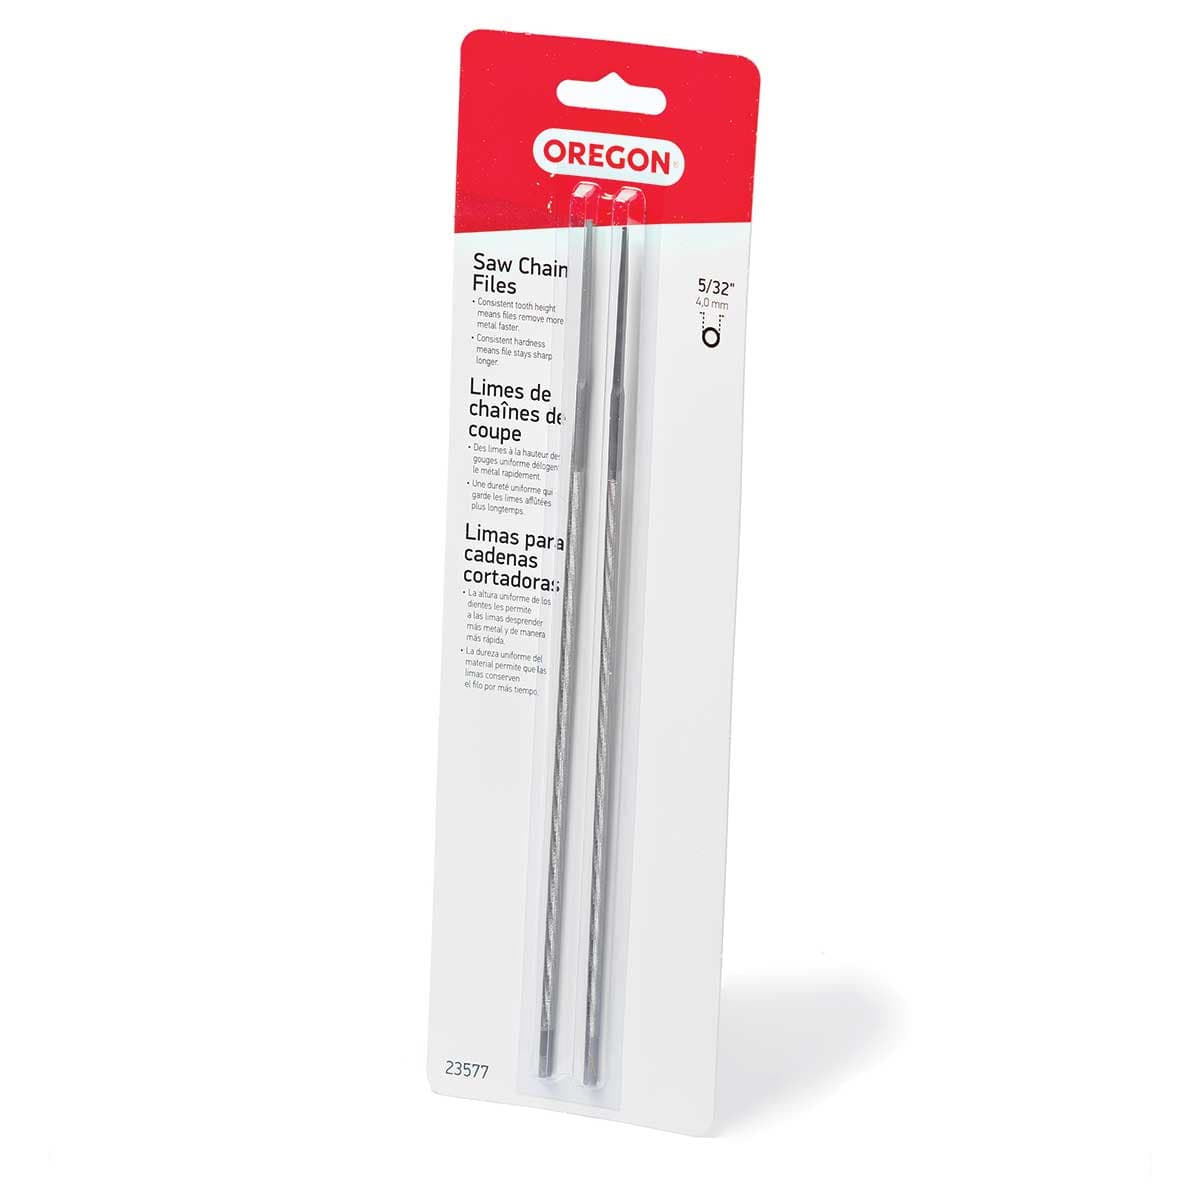 Oregon Saw Chain Files, 2-pack